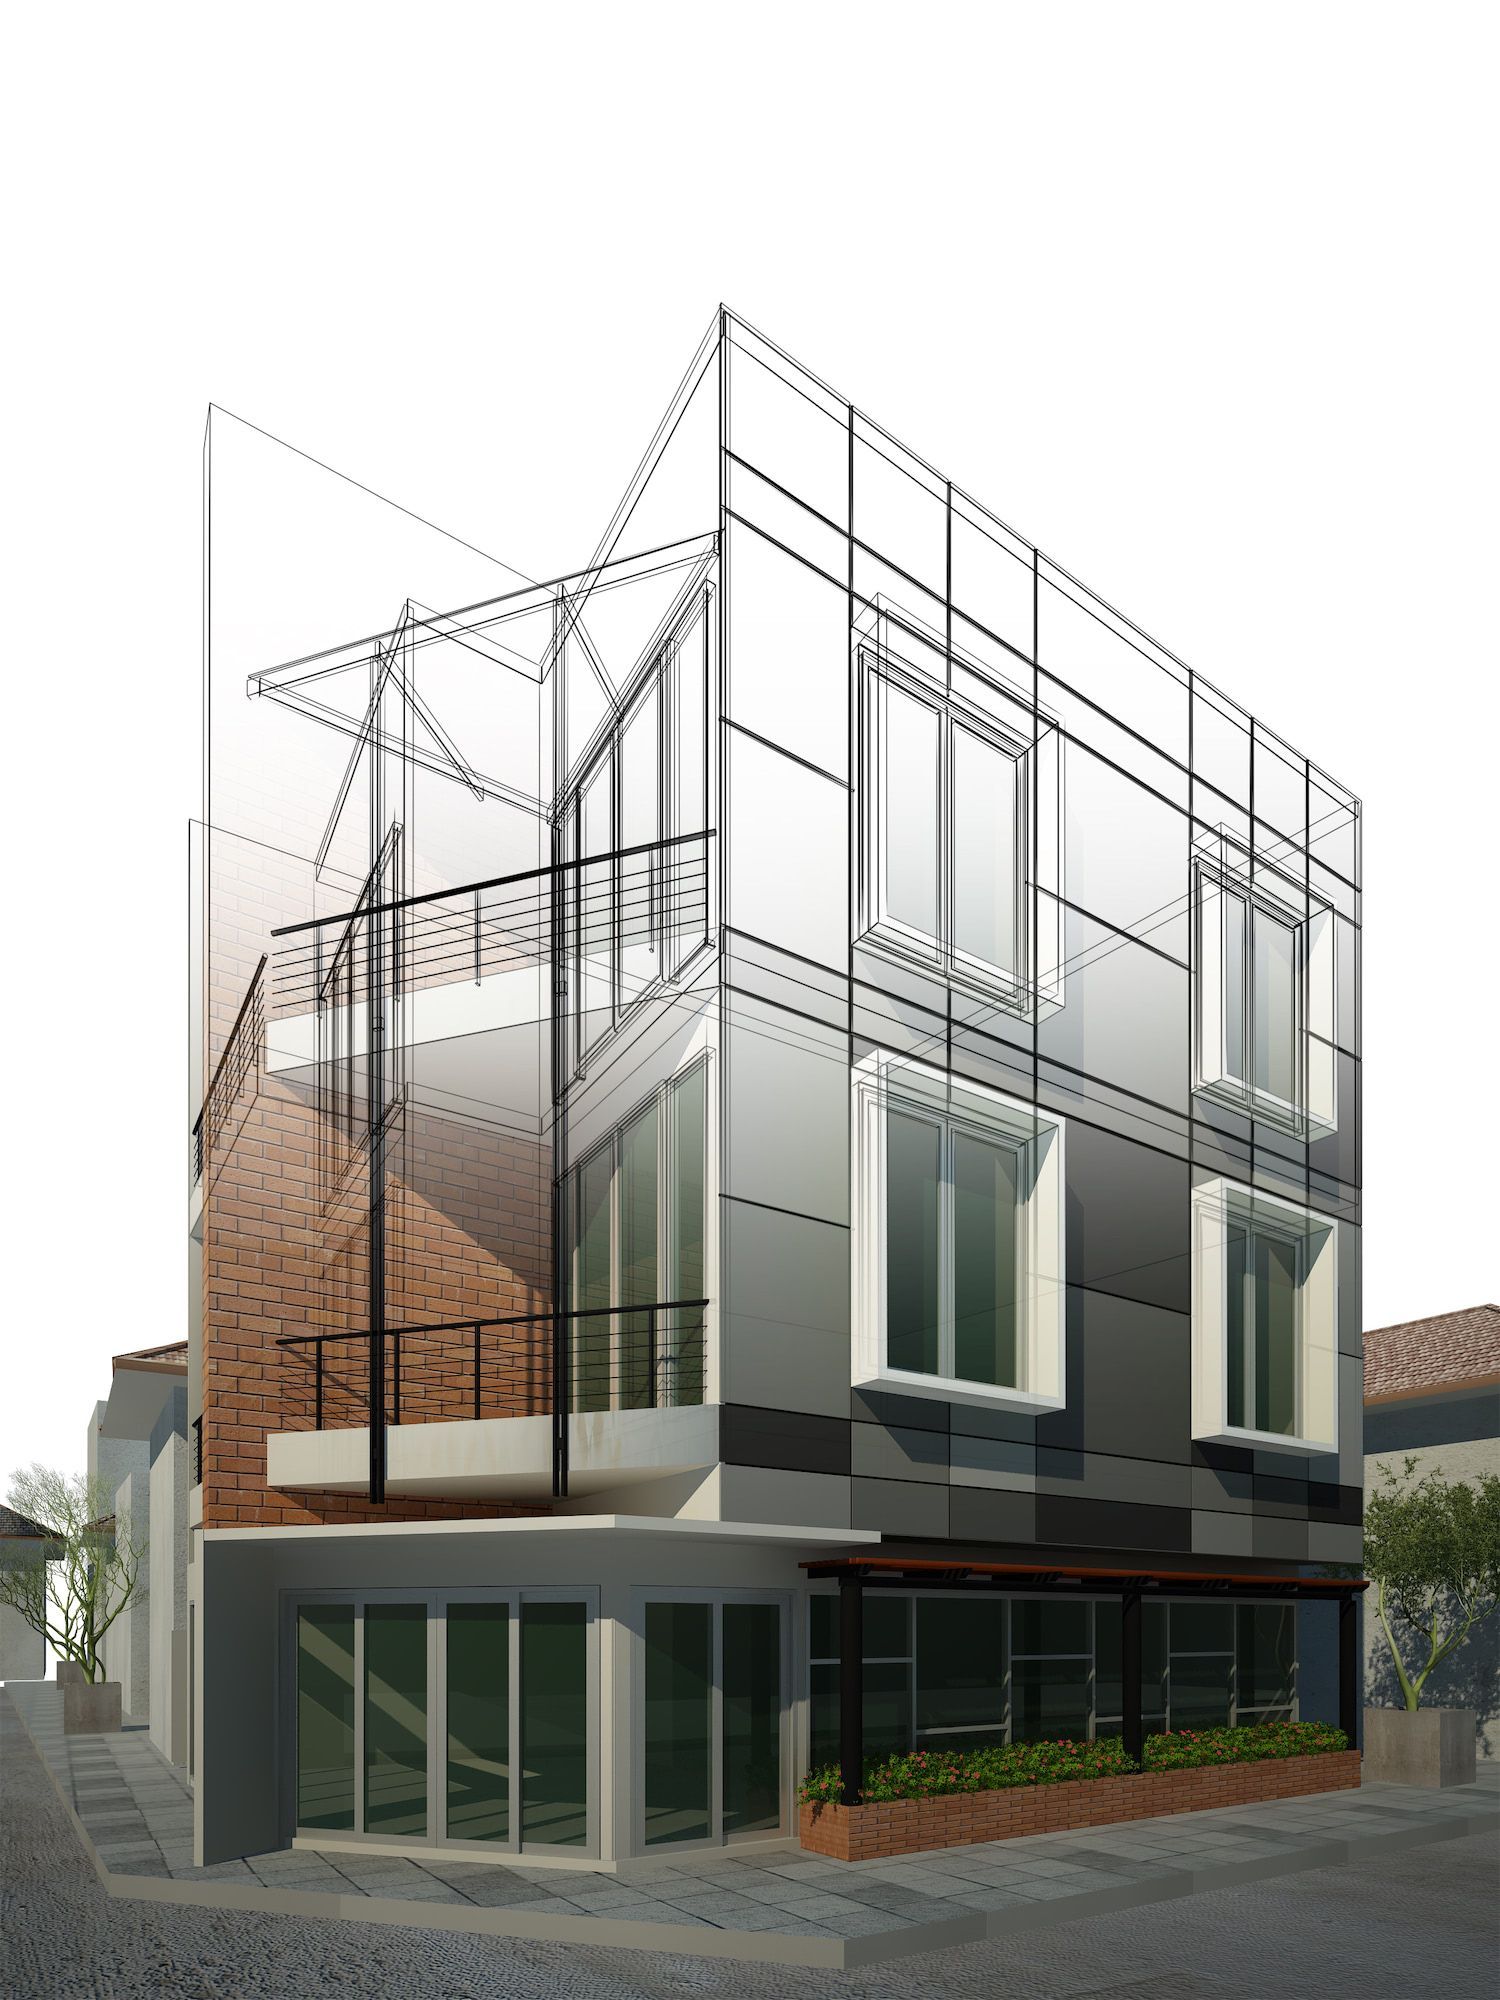 an artist 's impression of a modern building with a balcony